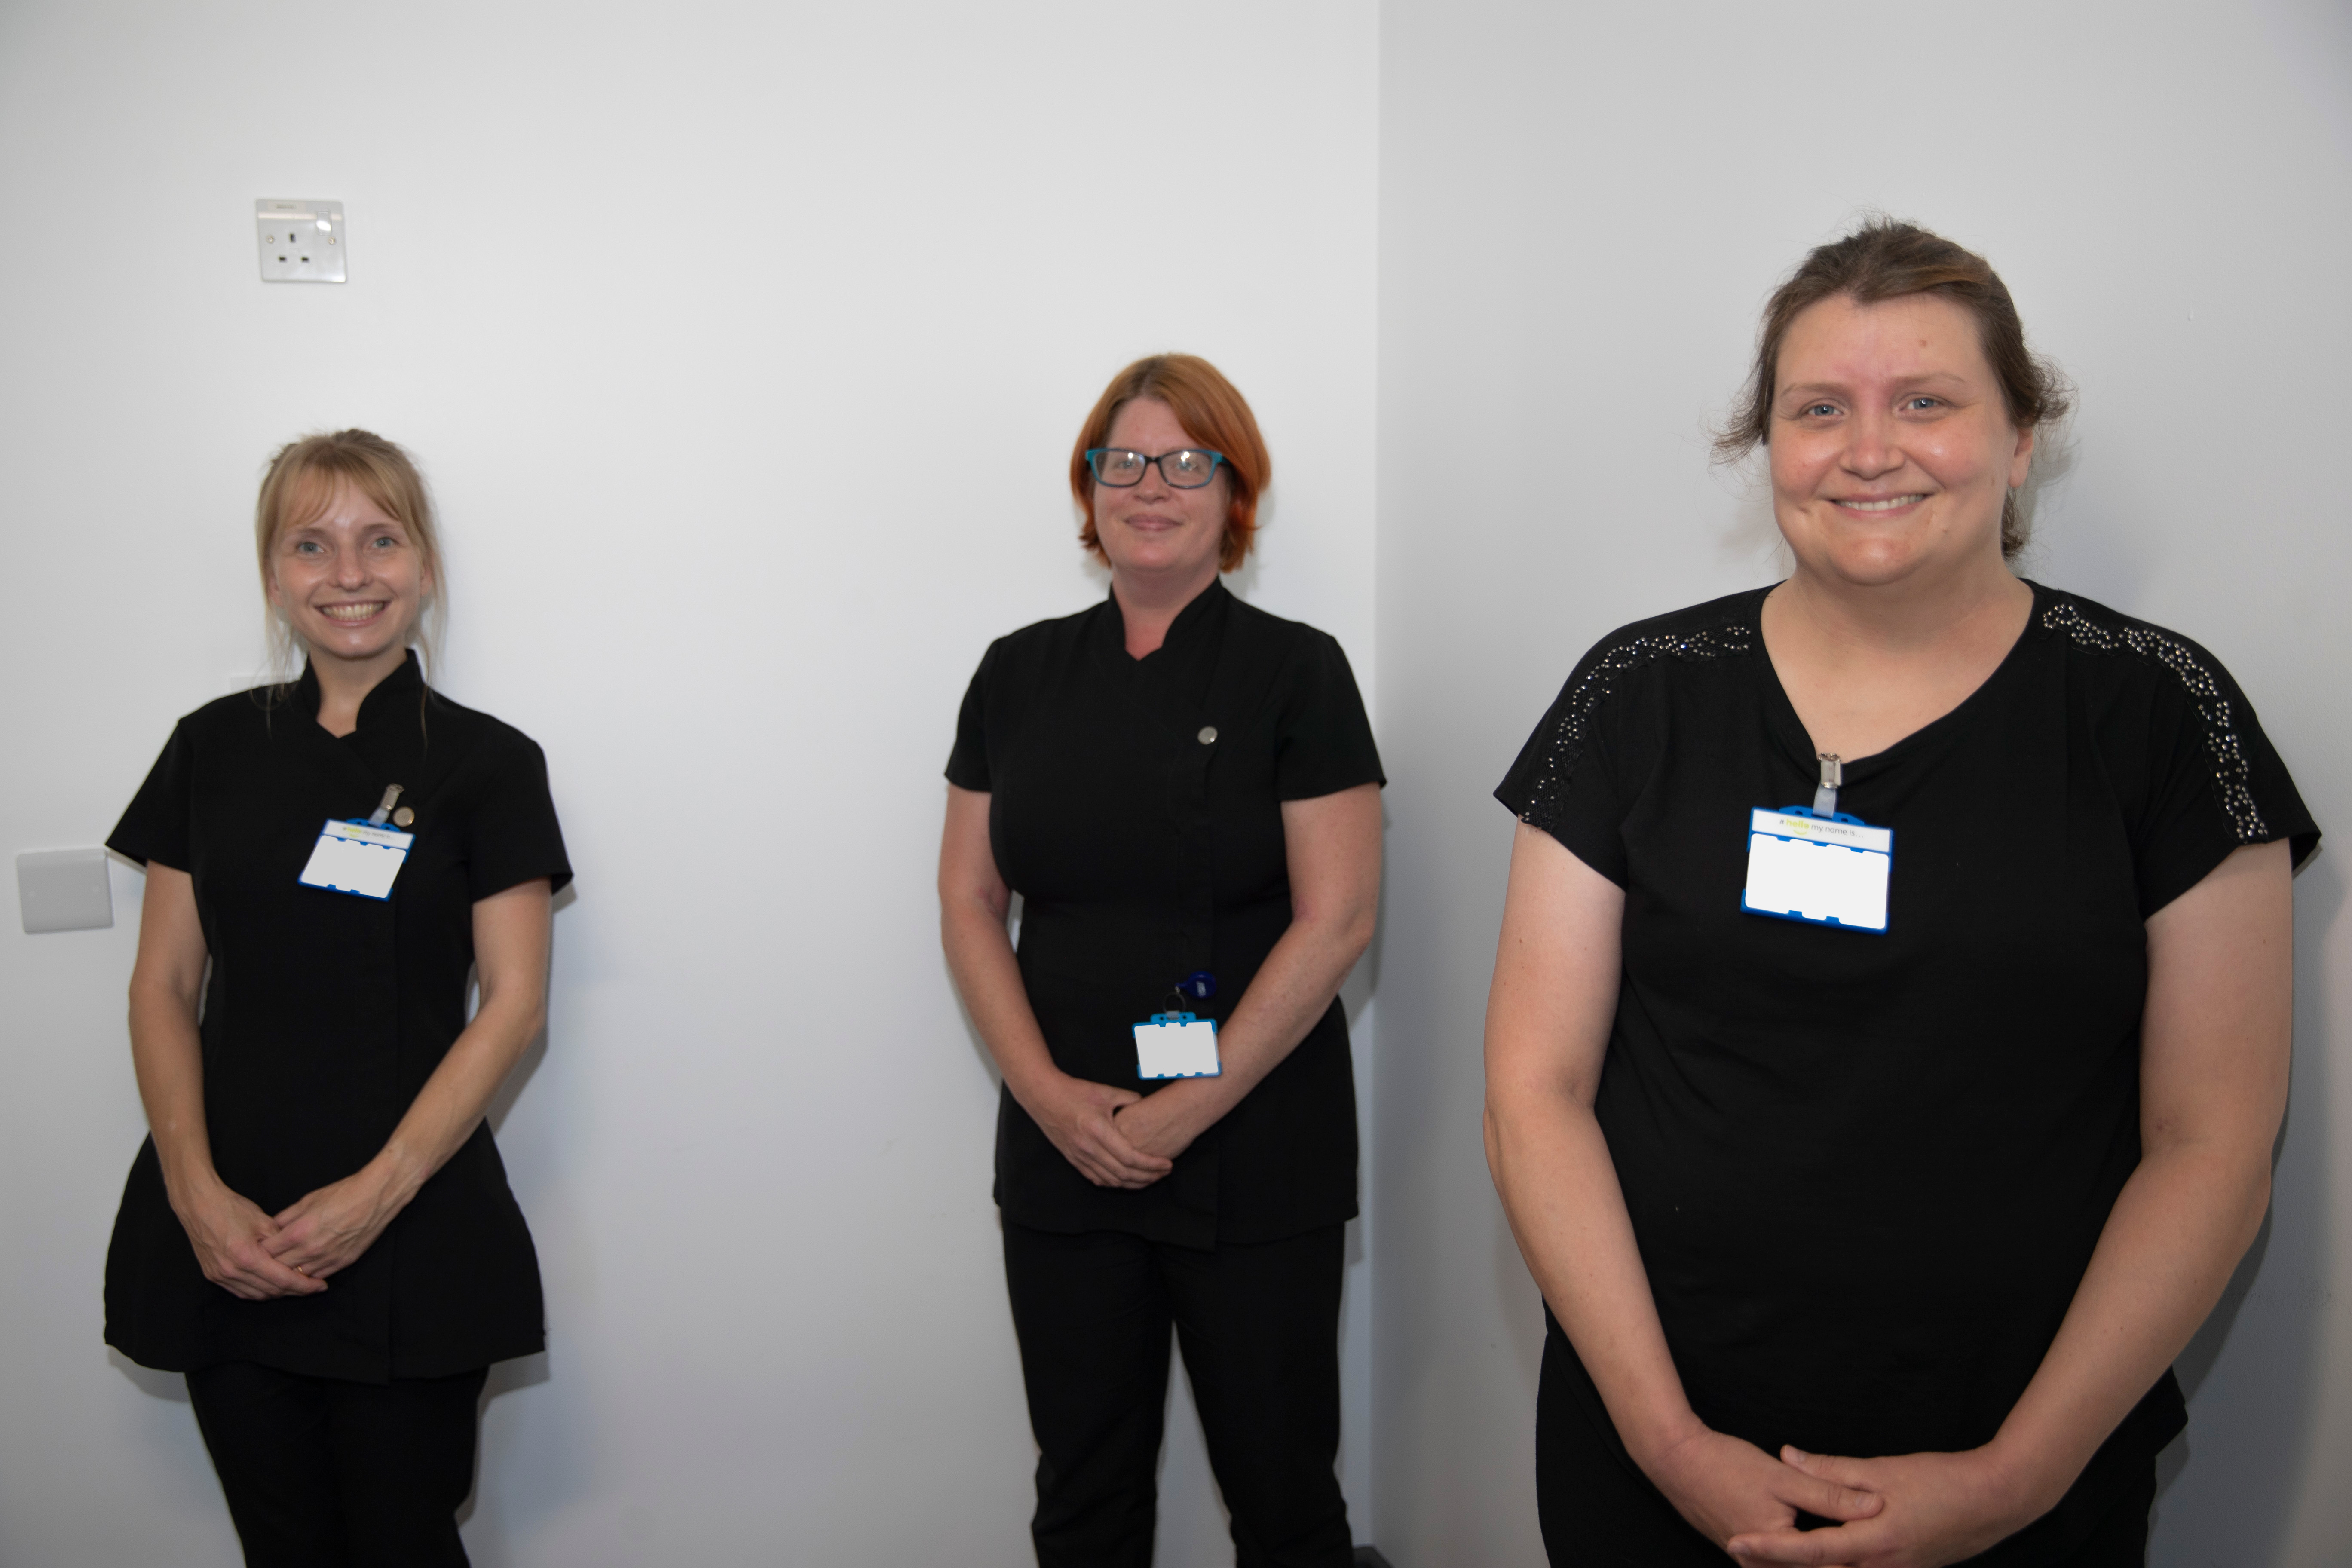 Staff from the Tinnitus Service